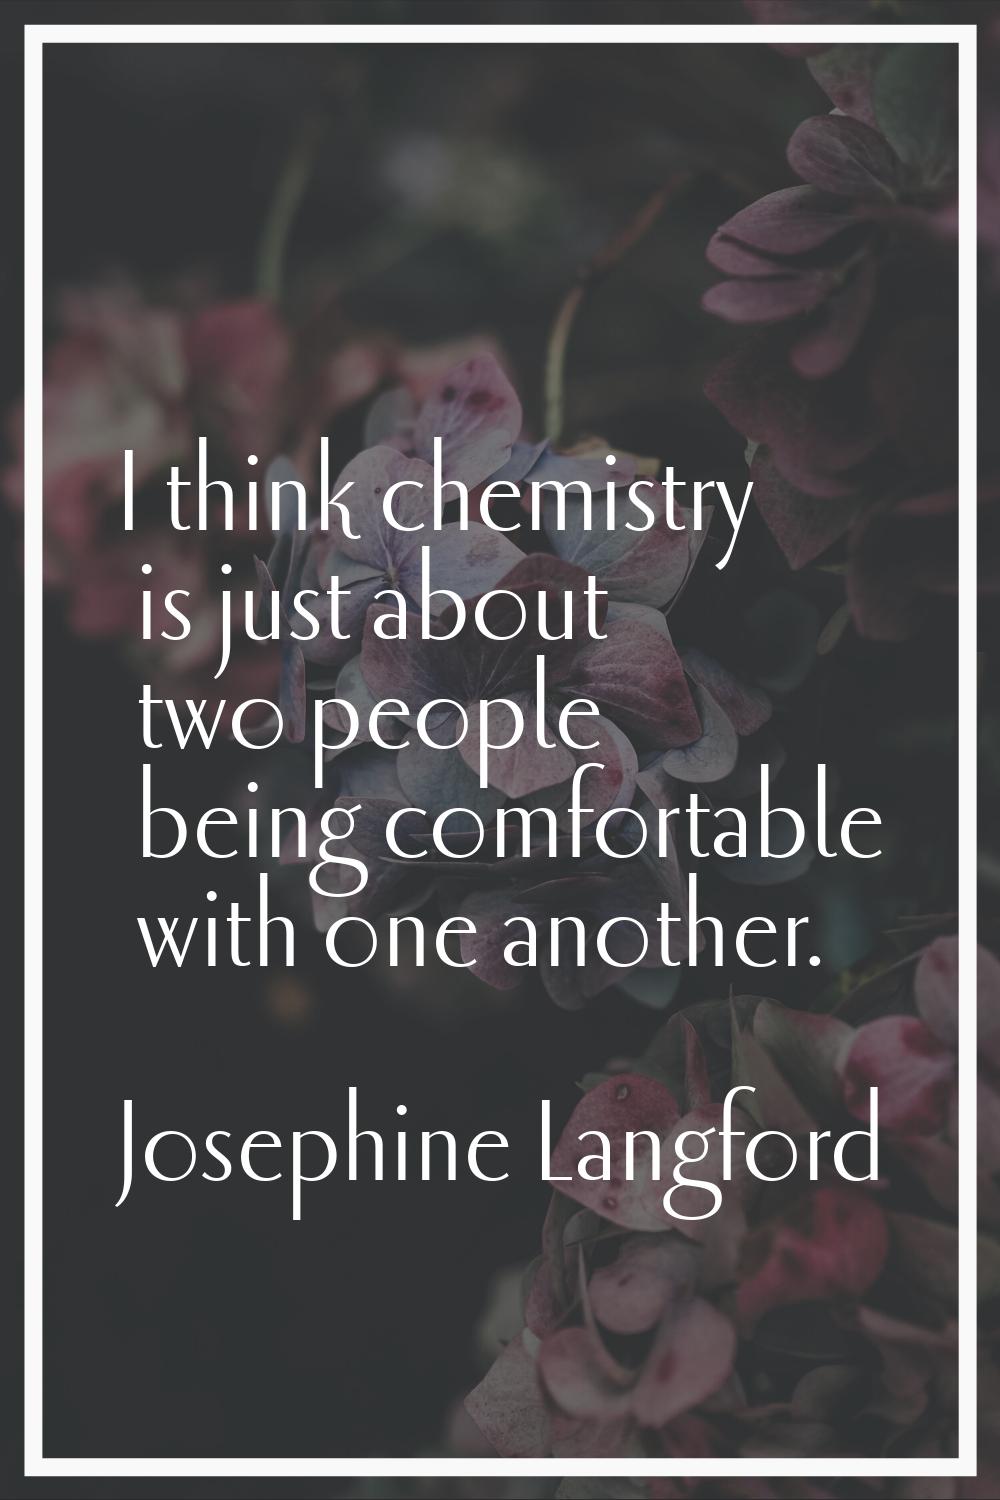 I think chemistry is just about two people being comfortable with one another.